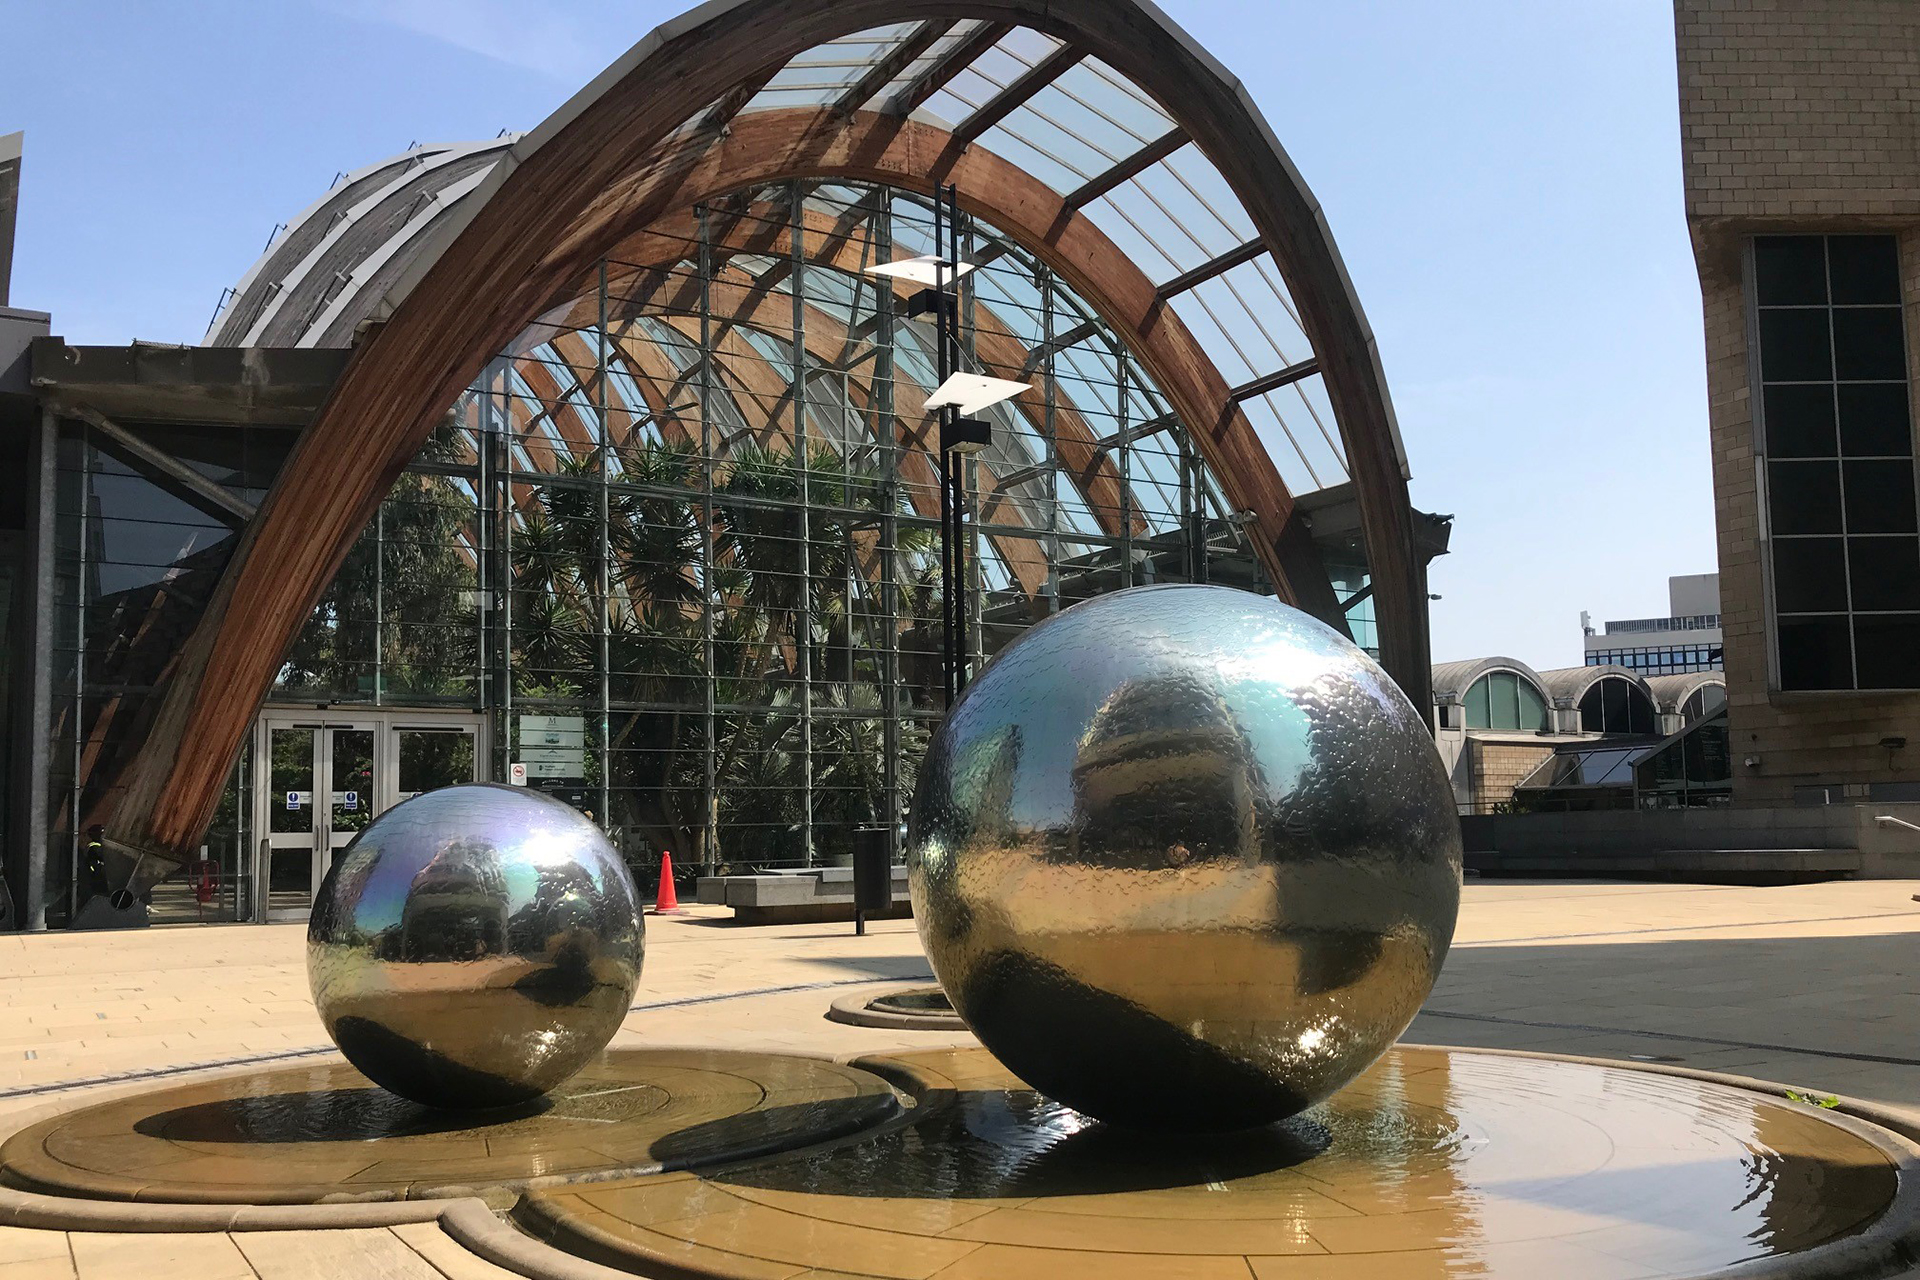 Photograph of 2 large silver spheres sitting in shallow pools of water on a sunny day. In the background there is a large wooden and glass arched structure filled with plants.